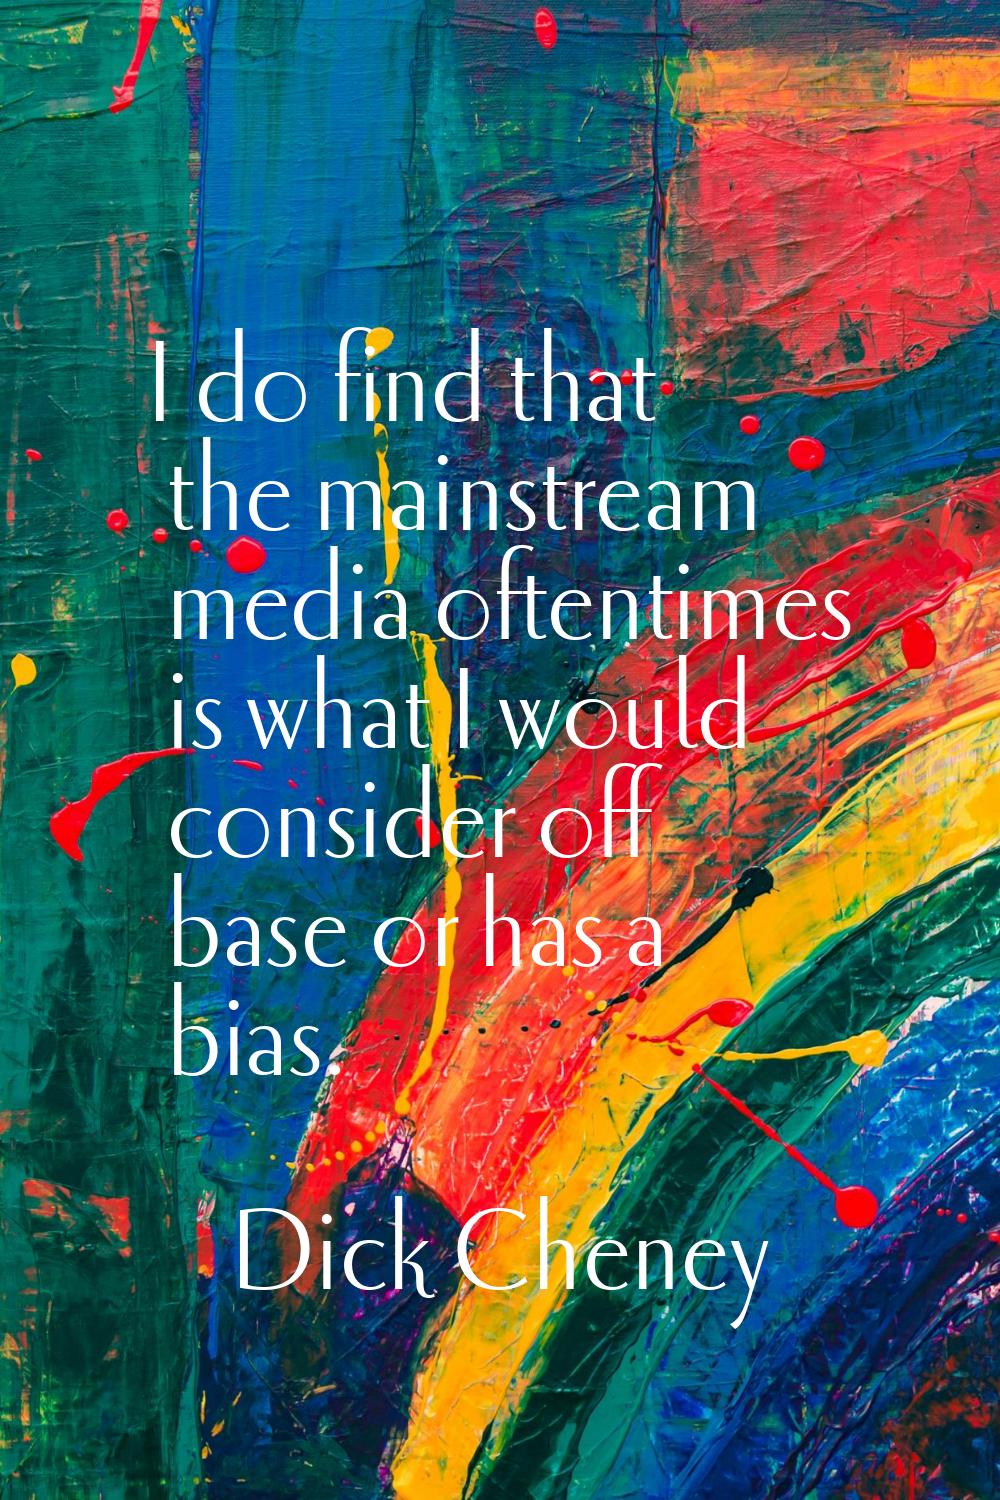 I do find that the mainstream media oftentimes is what I would consider off base or has a bias.